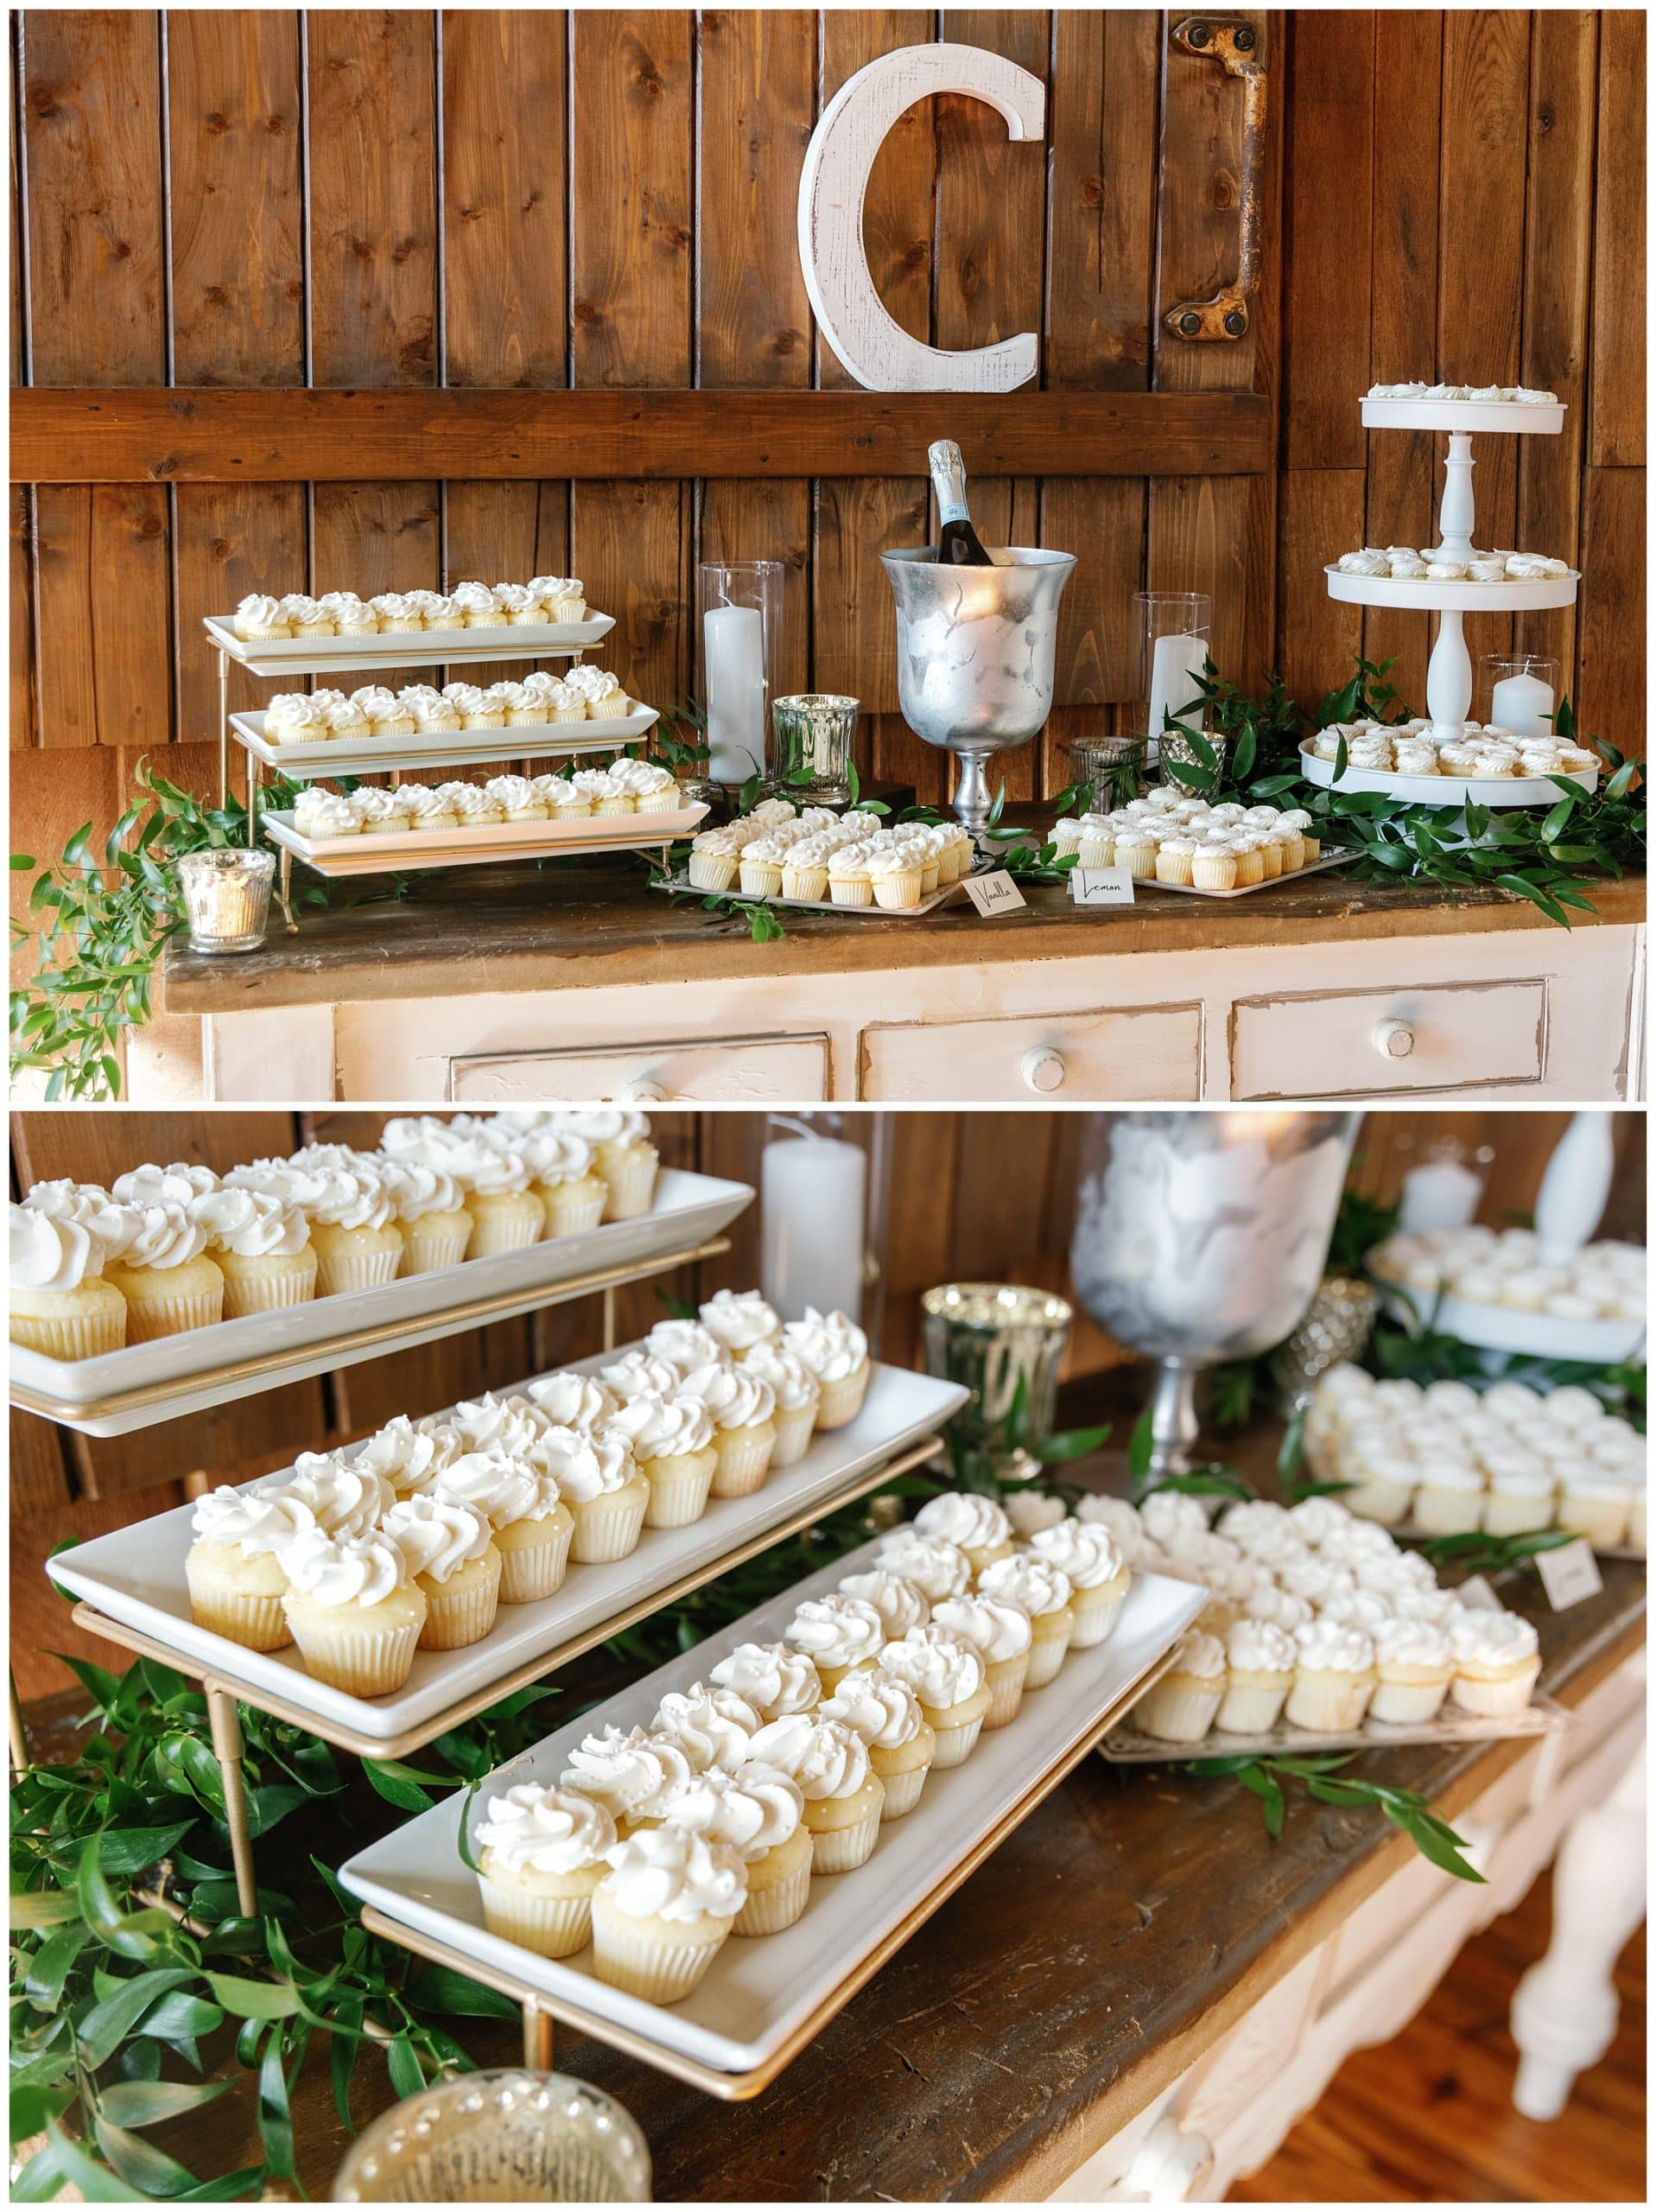 Cupcake display at wedding reception with white icing